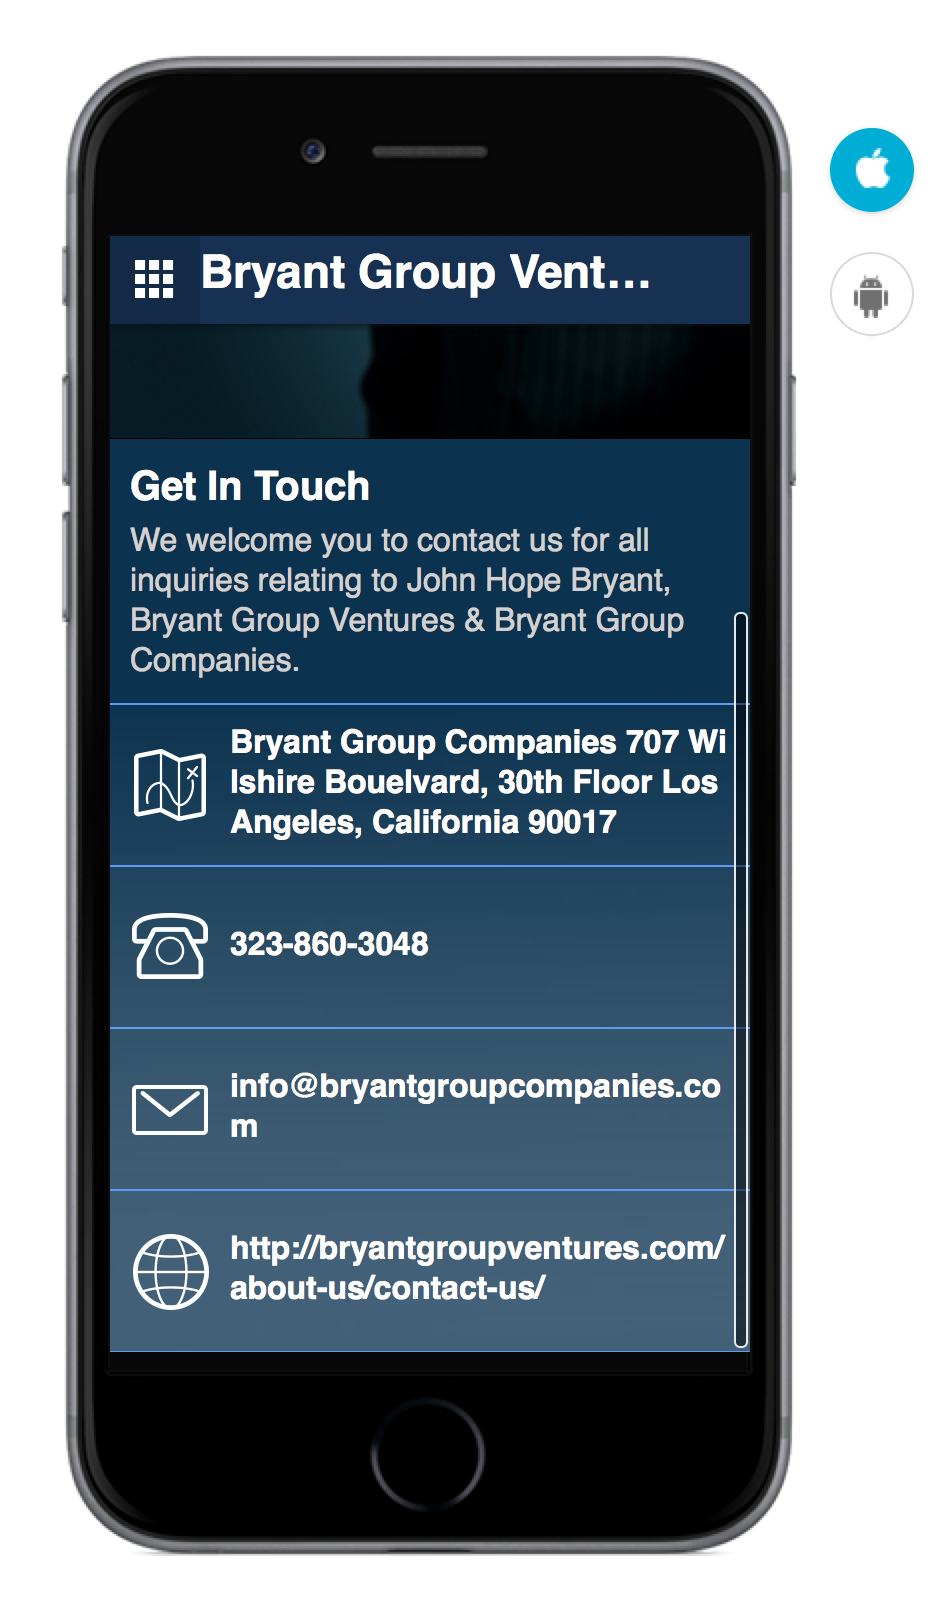 Bryant Group Ventures iOS and Android App Design and Development by Seviant Studios